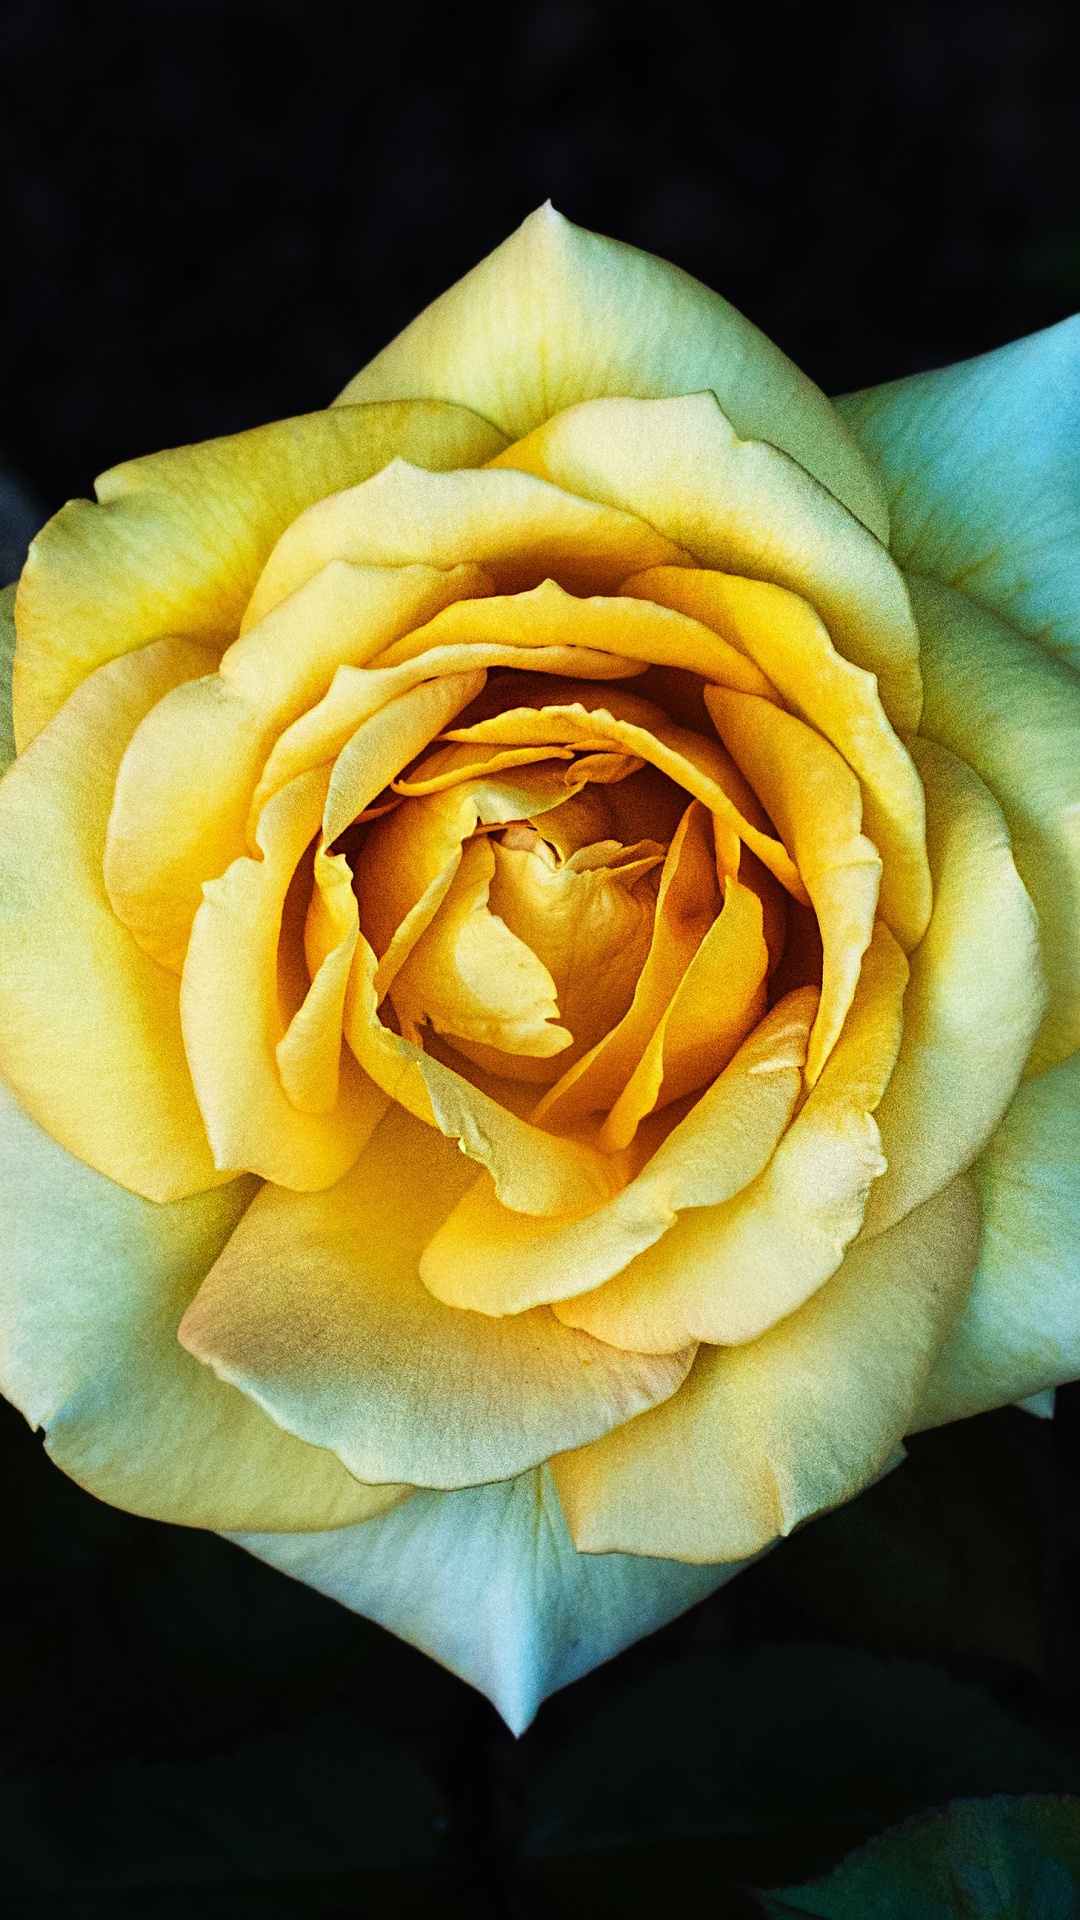 Yellow Rose in Bloom Close up Photo. Wallpaper in 1080x1920 Resolution